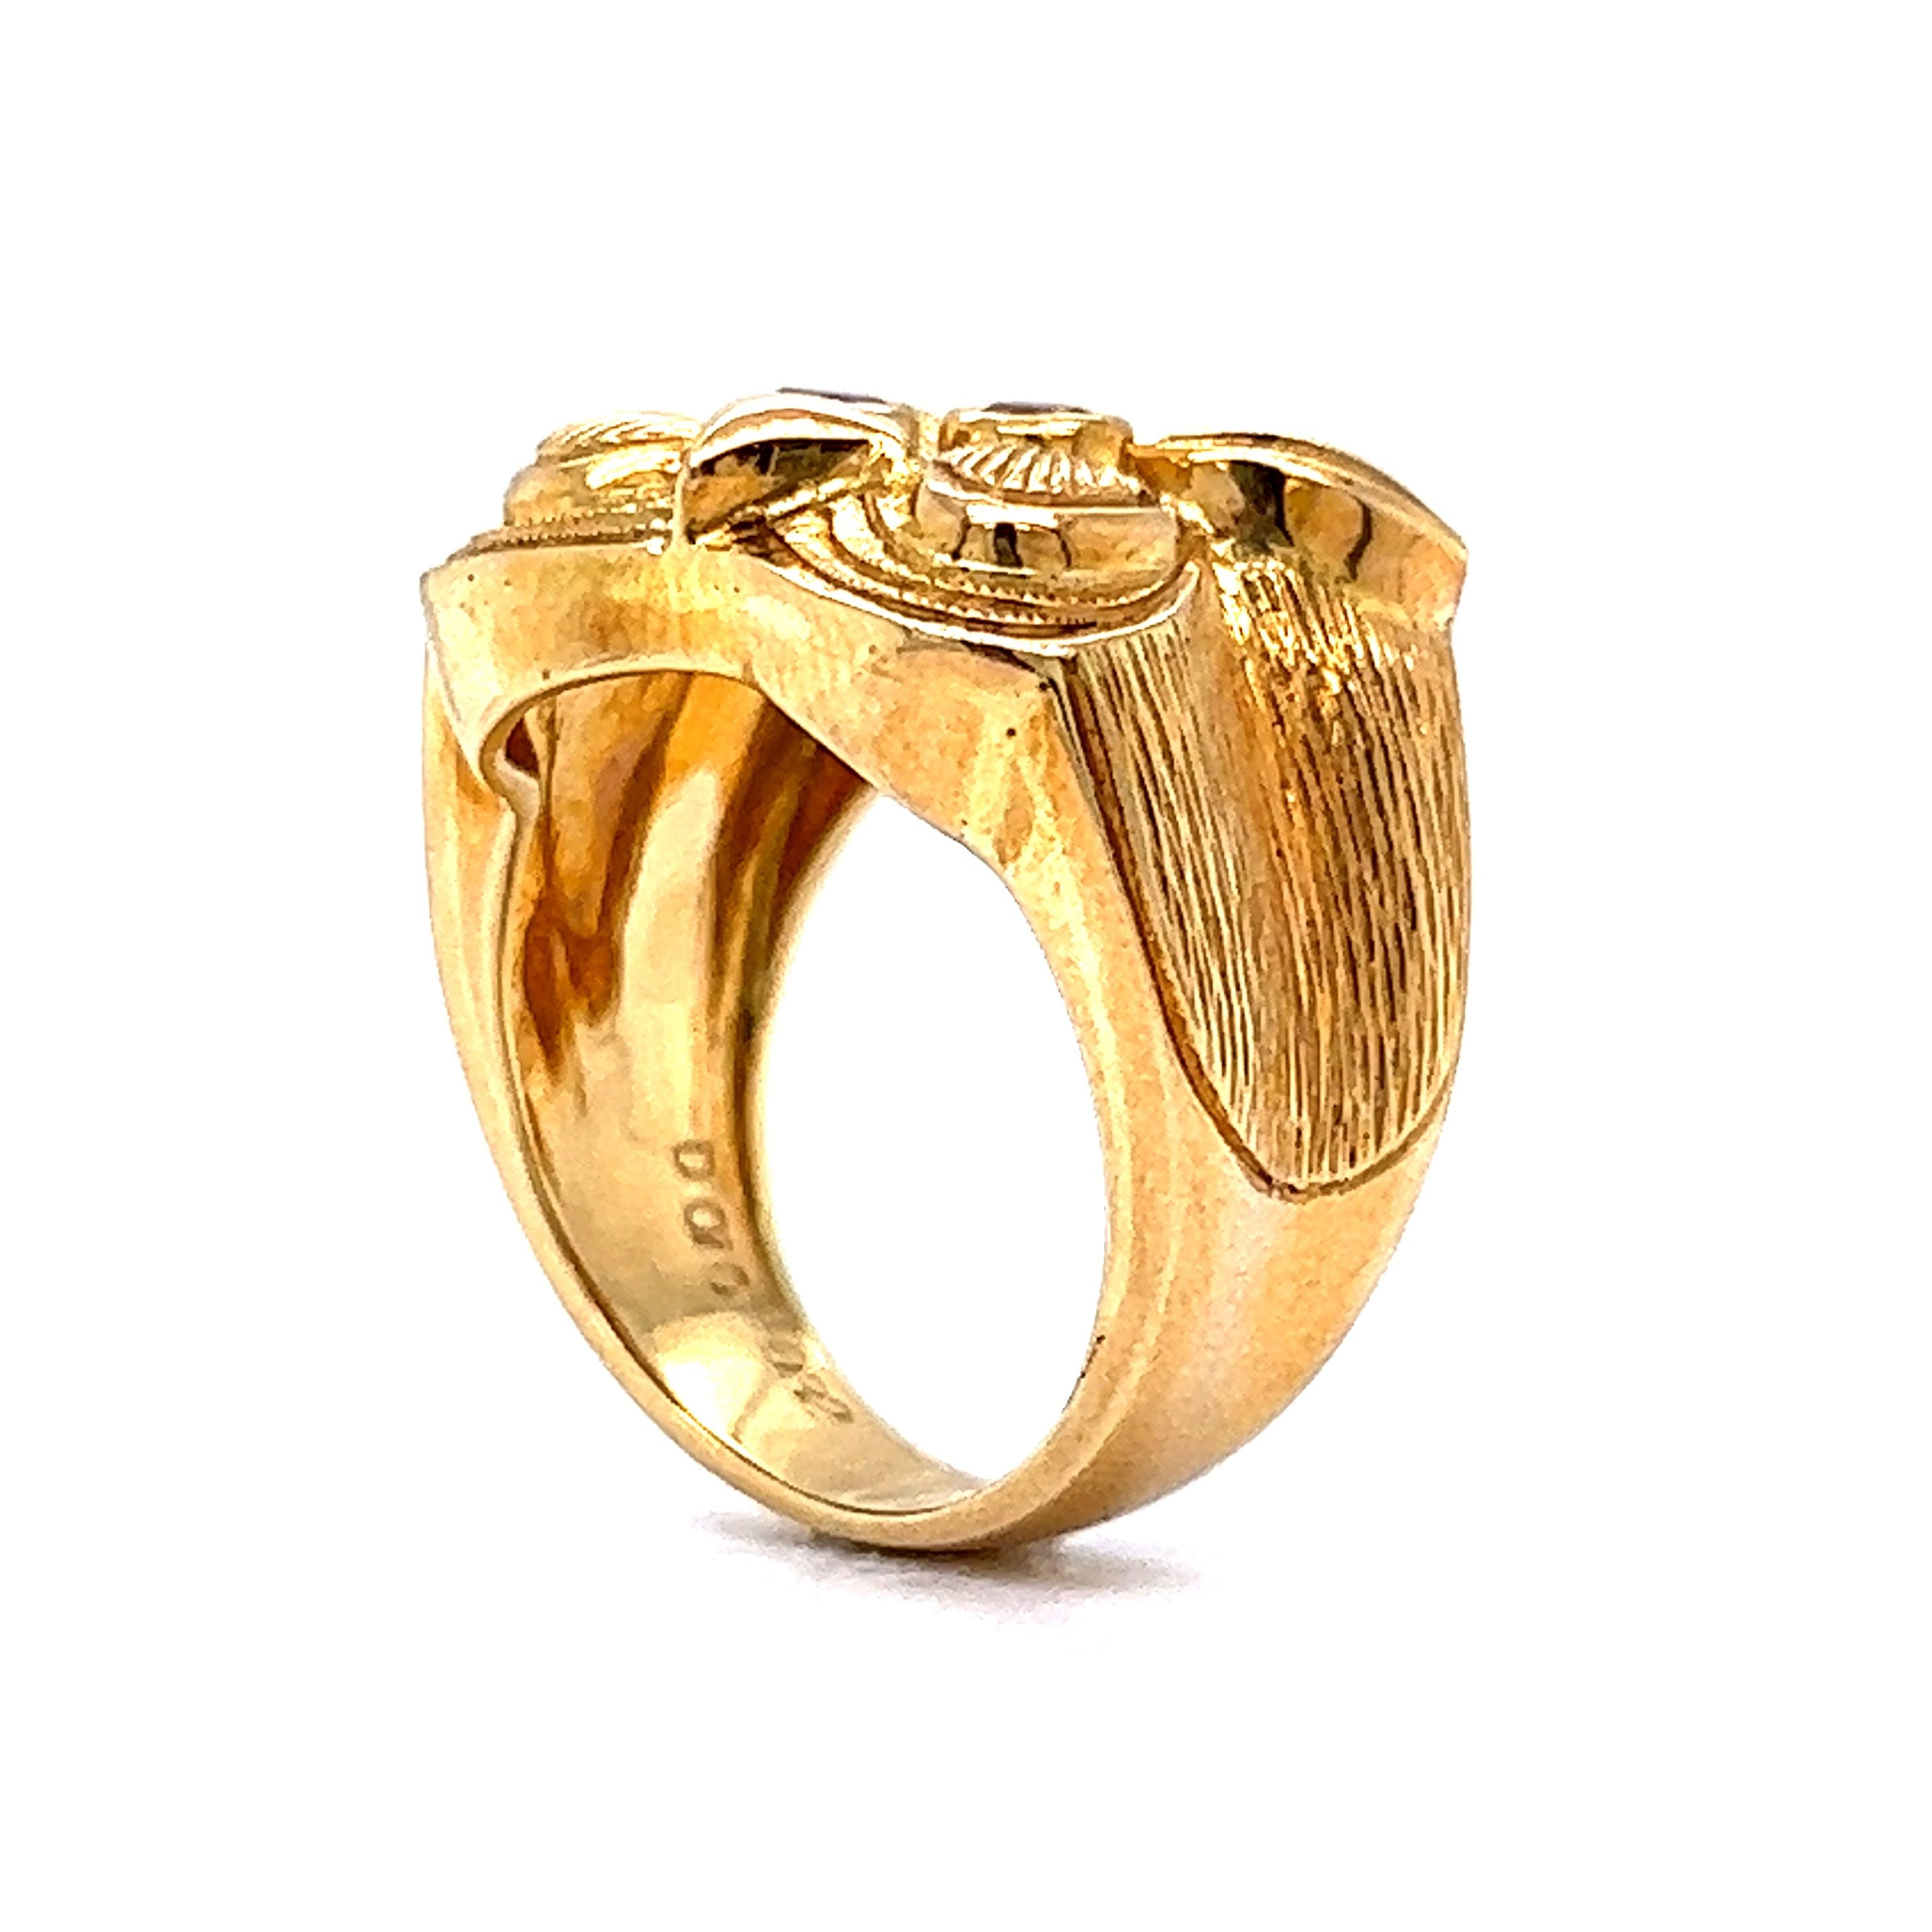 ROMAN RING WITH CHRISTMAS | Monte-Carlo Sales Hall